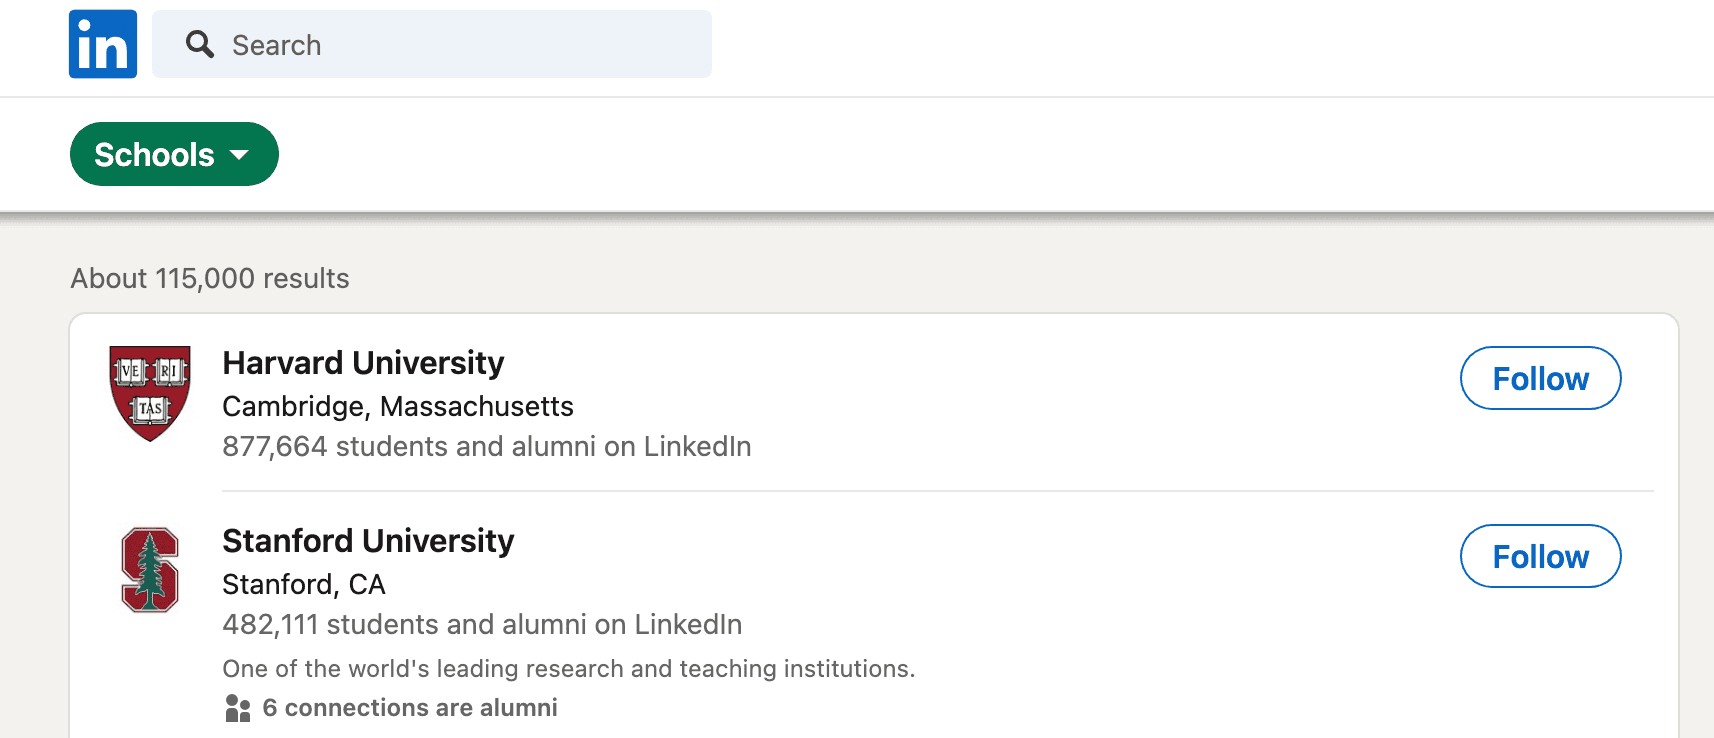 linkedin schools search results - image56.png